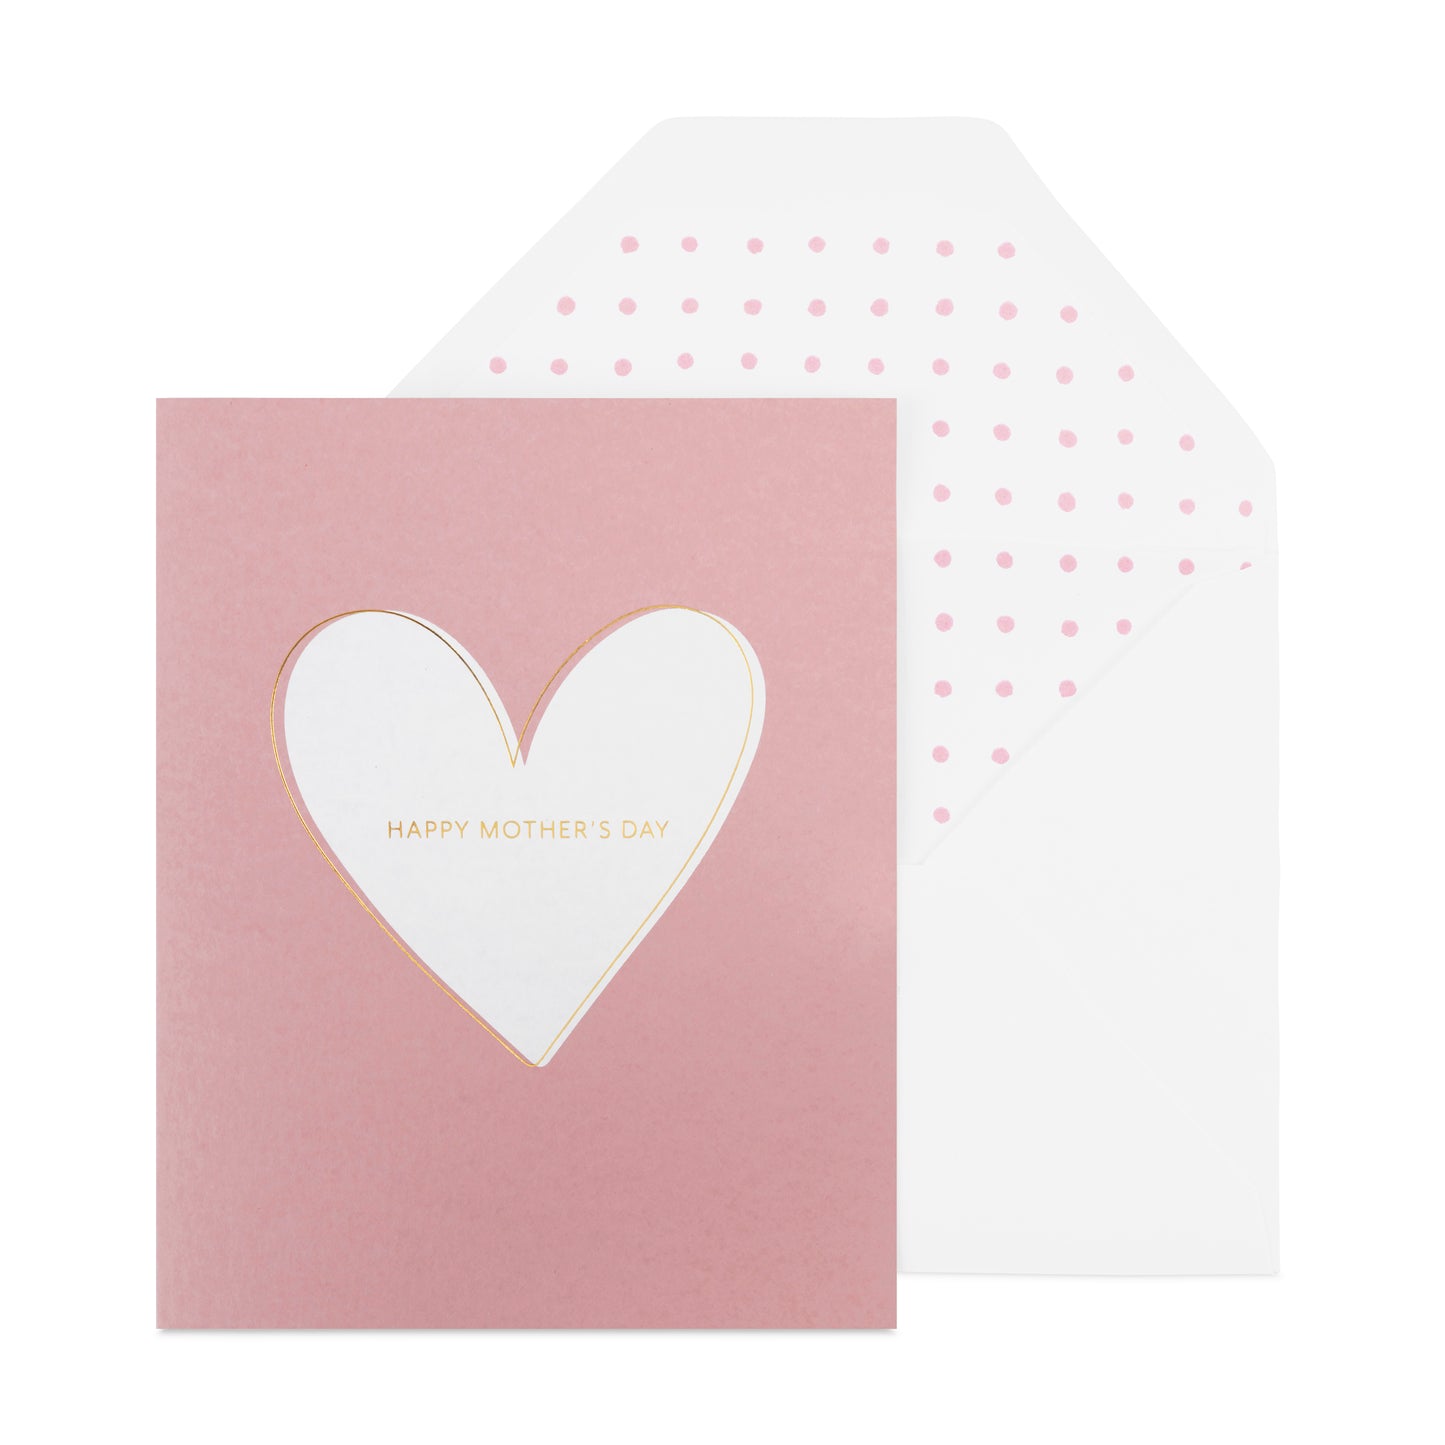 Dusty Rose Happy Mother's Day card with white heart